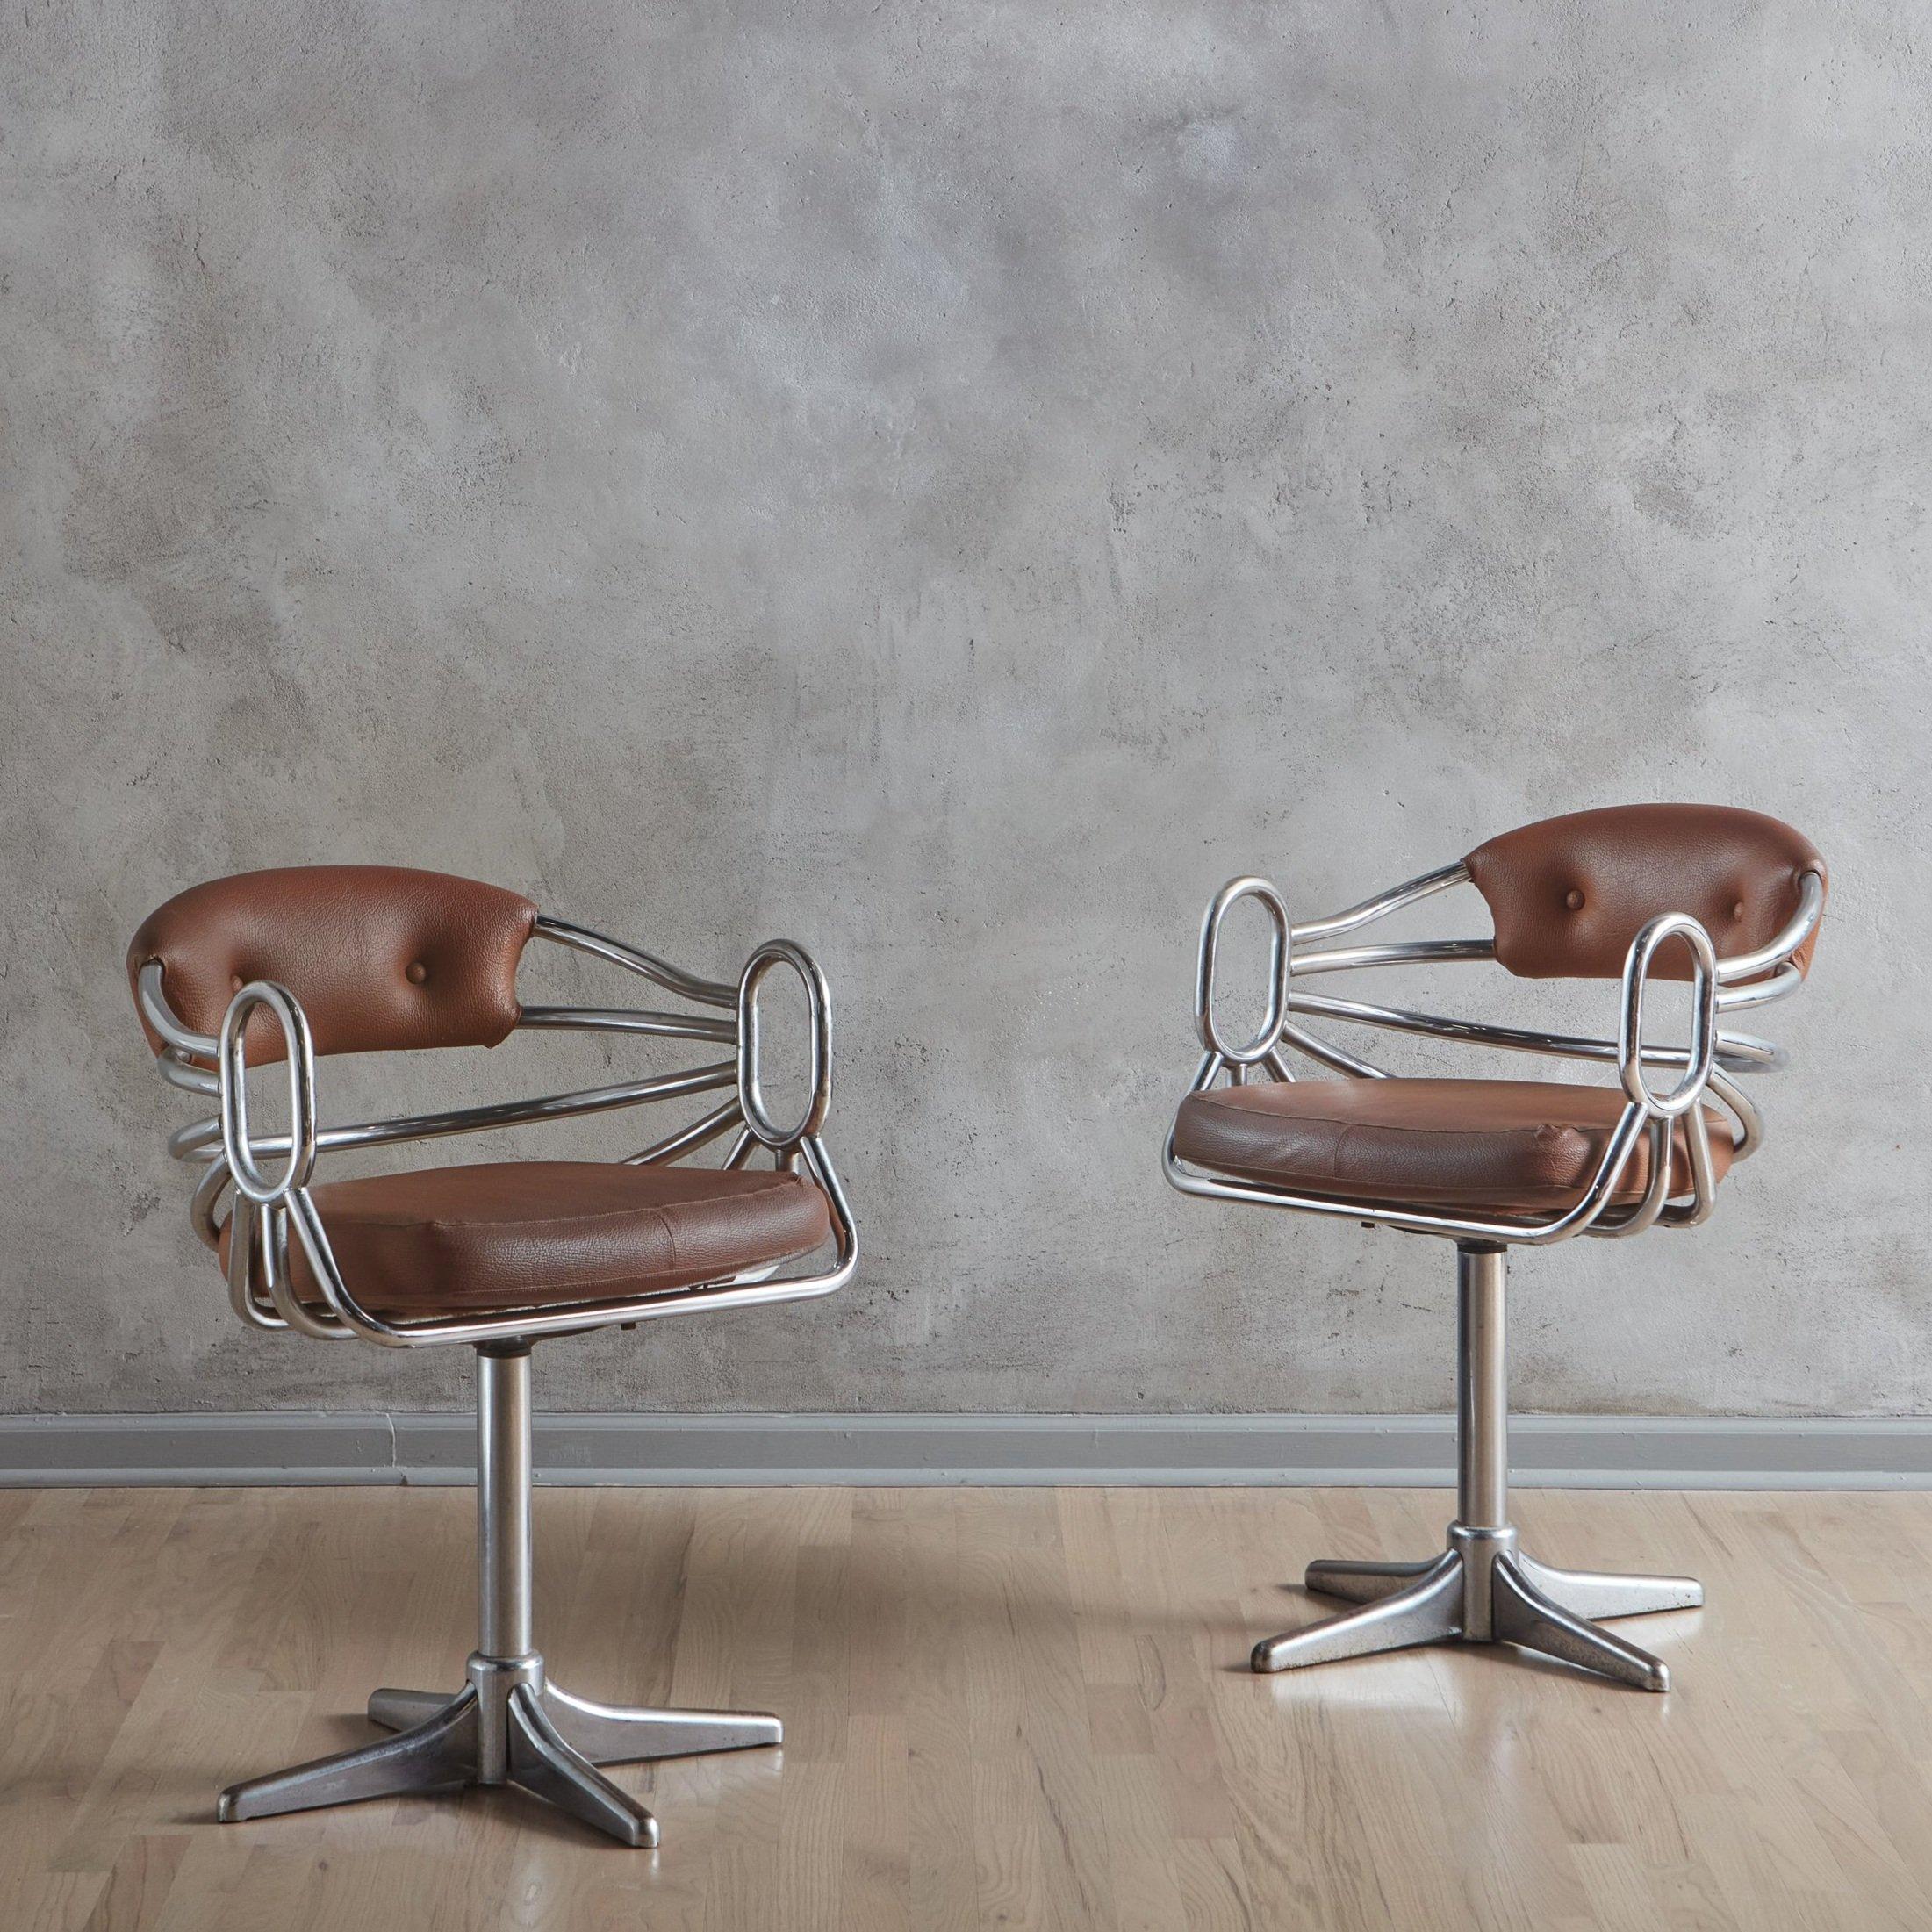 Italian Chrome Swivel Desk Chair in Brown Leather, Italy 1960s - 2 Available For Sale